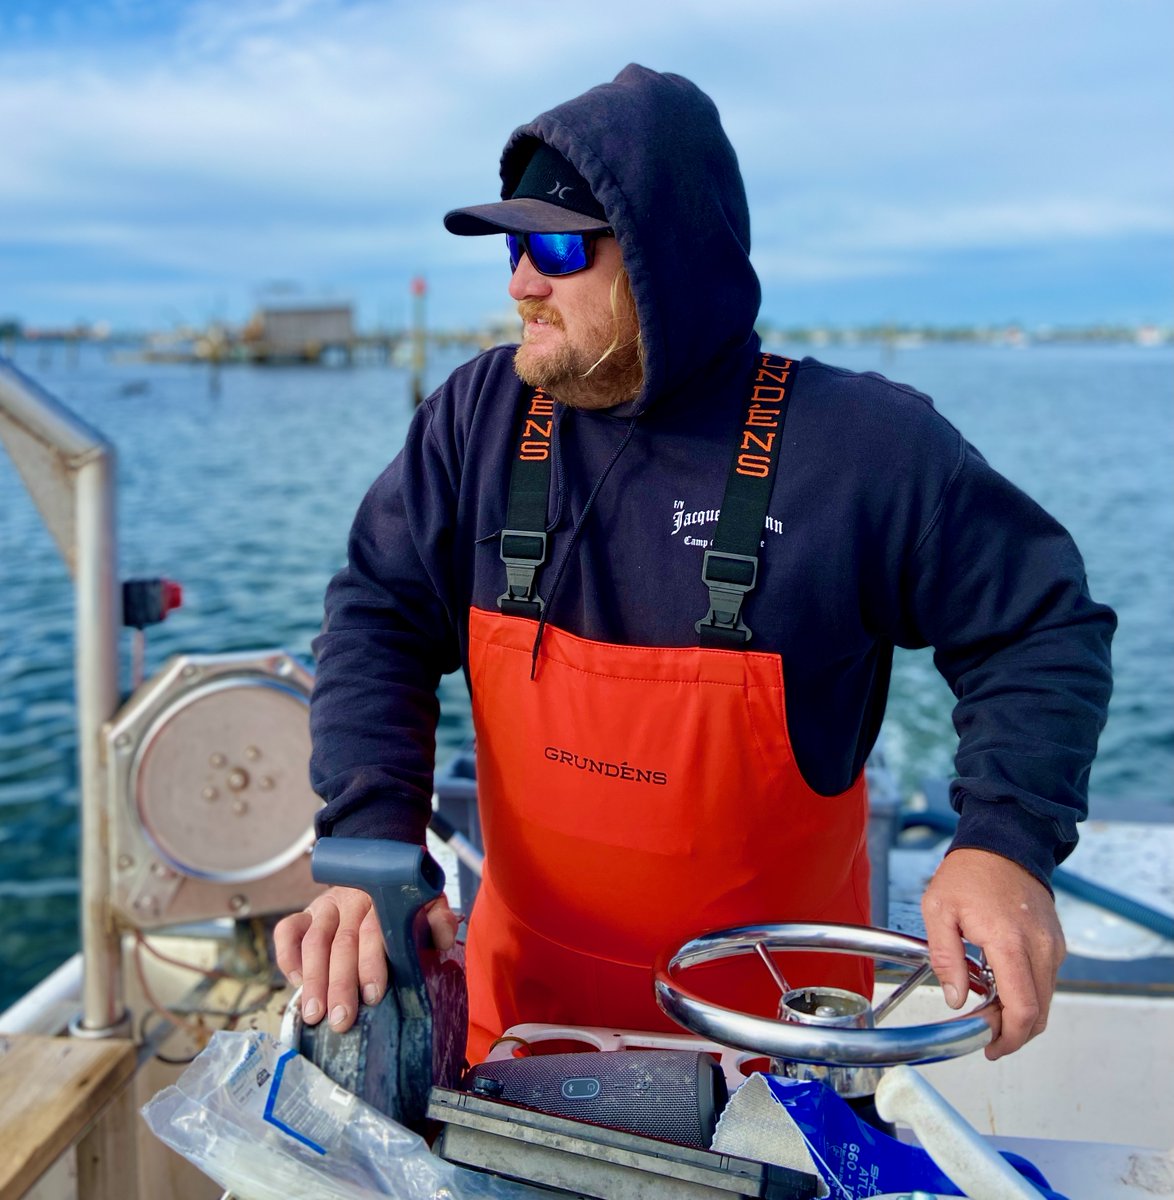 NEW in our International Section: 'On Anna Maria Island, Sustainable Fishing Is a Sensation', focusing on stone crab claws and where to enjoy them on #Florida's Gulf Coast.

vacaynetwork.com/on-anna-maria-…

@VisitBradenton #BradentonArea